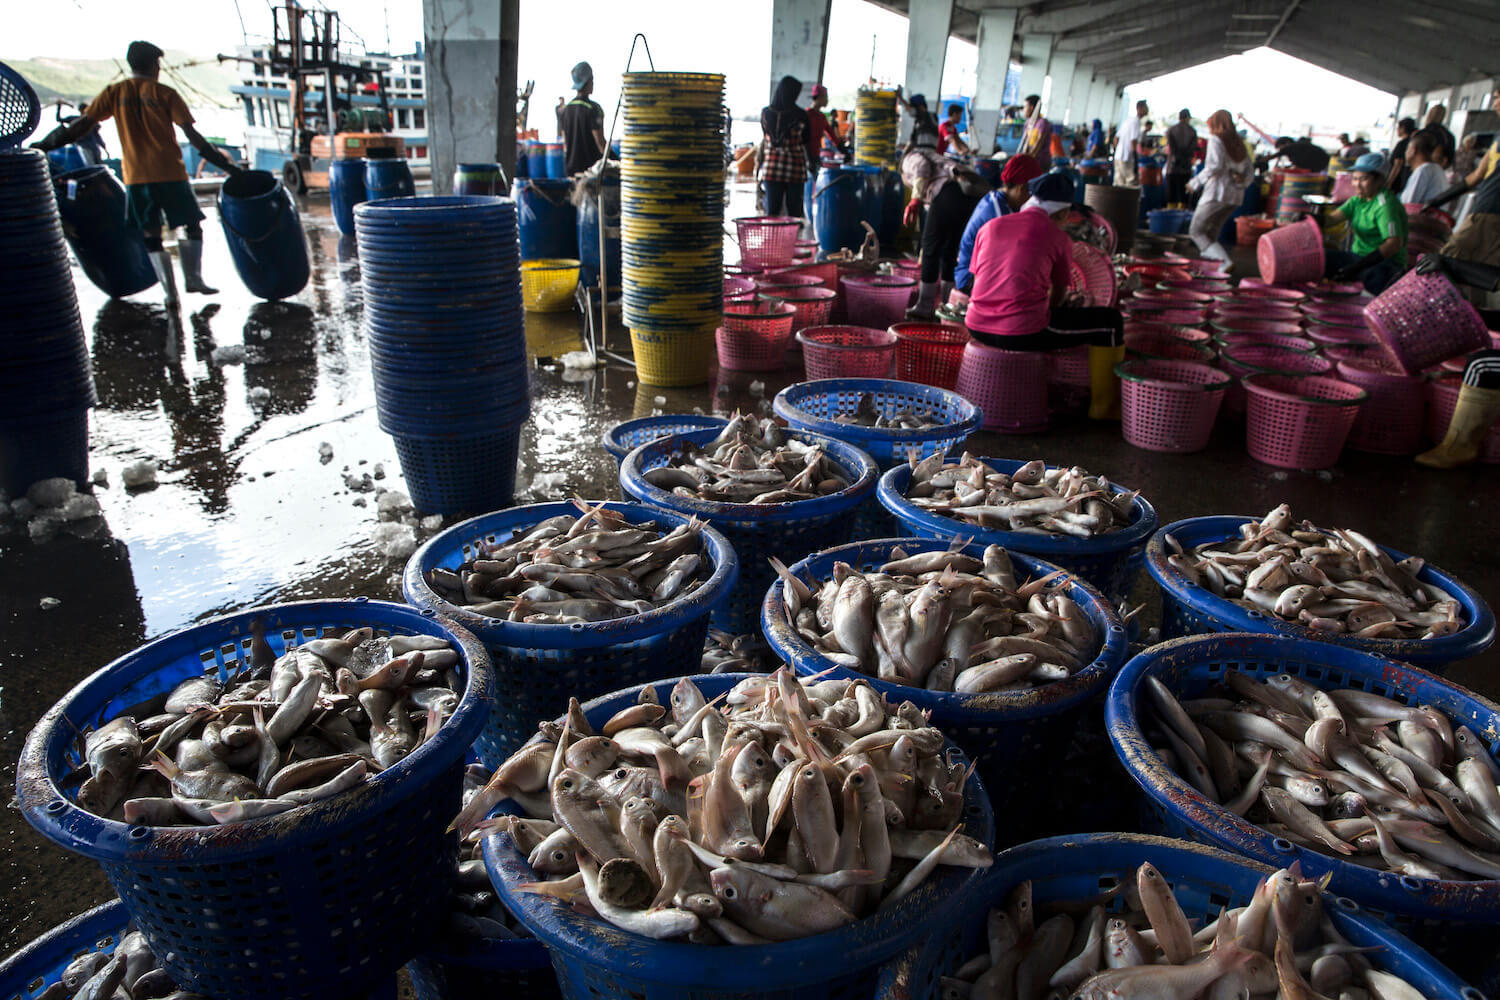 Buckets of fish are seen at the port in Songkhla on February 1, 2016. Around 100 people have been arrested by authorities in a recent crackdown on abuses involvingThailand's multi-billion dollar seafood industry. The deep-rooted problem caused the huge global brand, Nestle in 2015 to admit that hat it had discovered clear evidence of slavery at sea in parts of the Thai supply chain. Thailand is the world's third largest exporter of seafood. February 2021